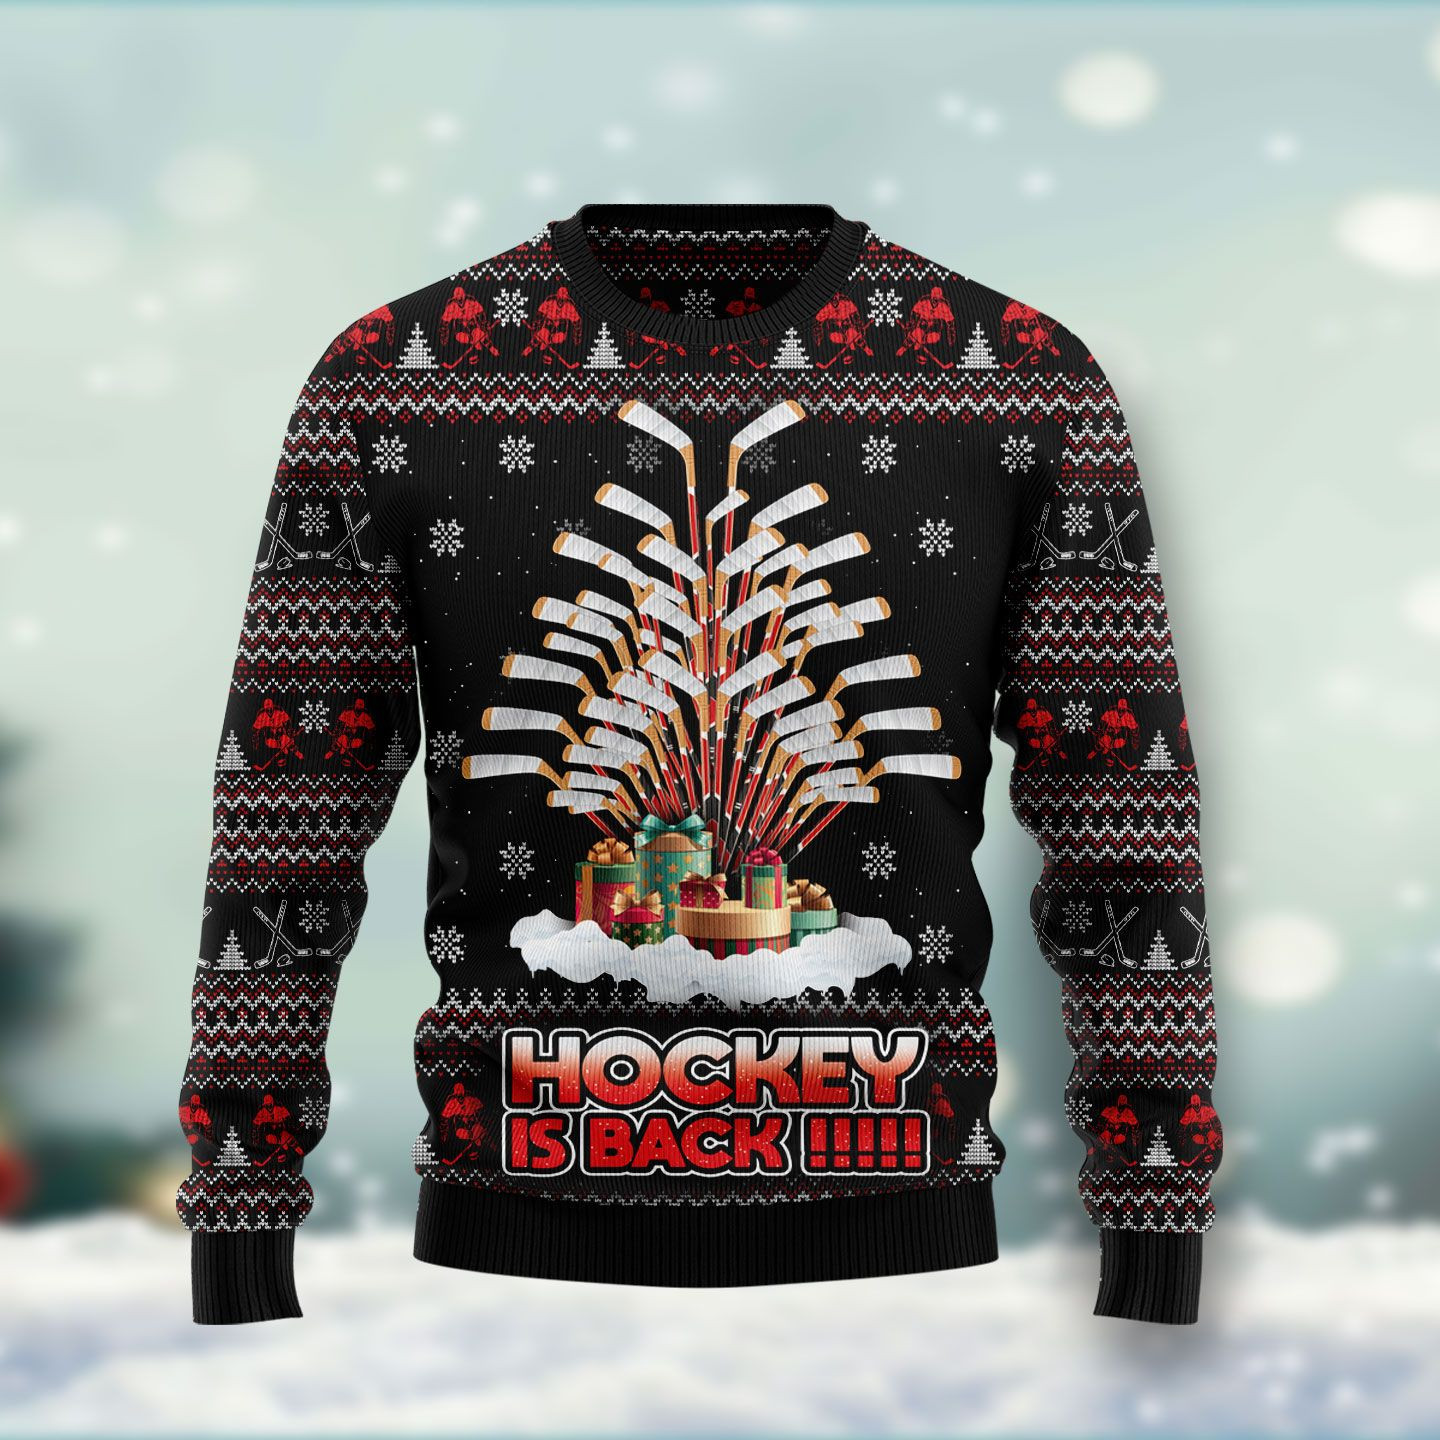 Hockey Is Back Ugly Christmas Sweater Ugly Sweater For Men Women, Holiday Sweater